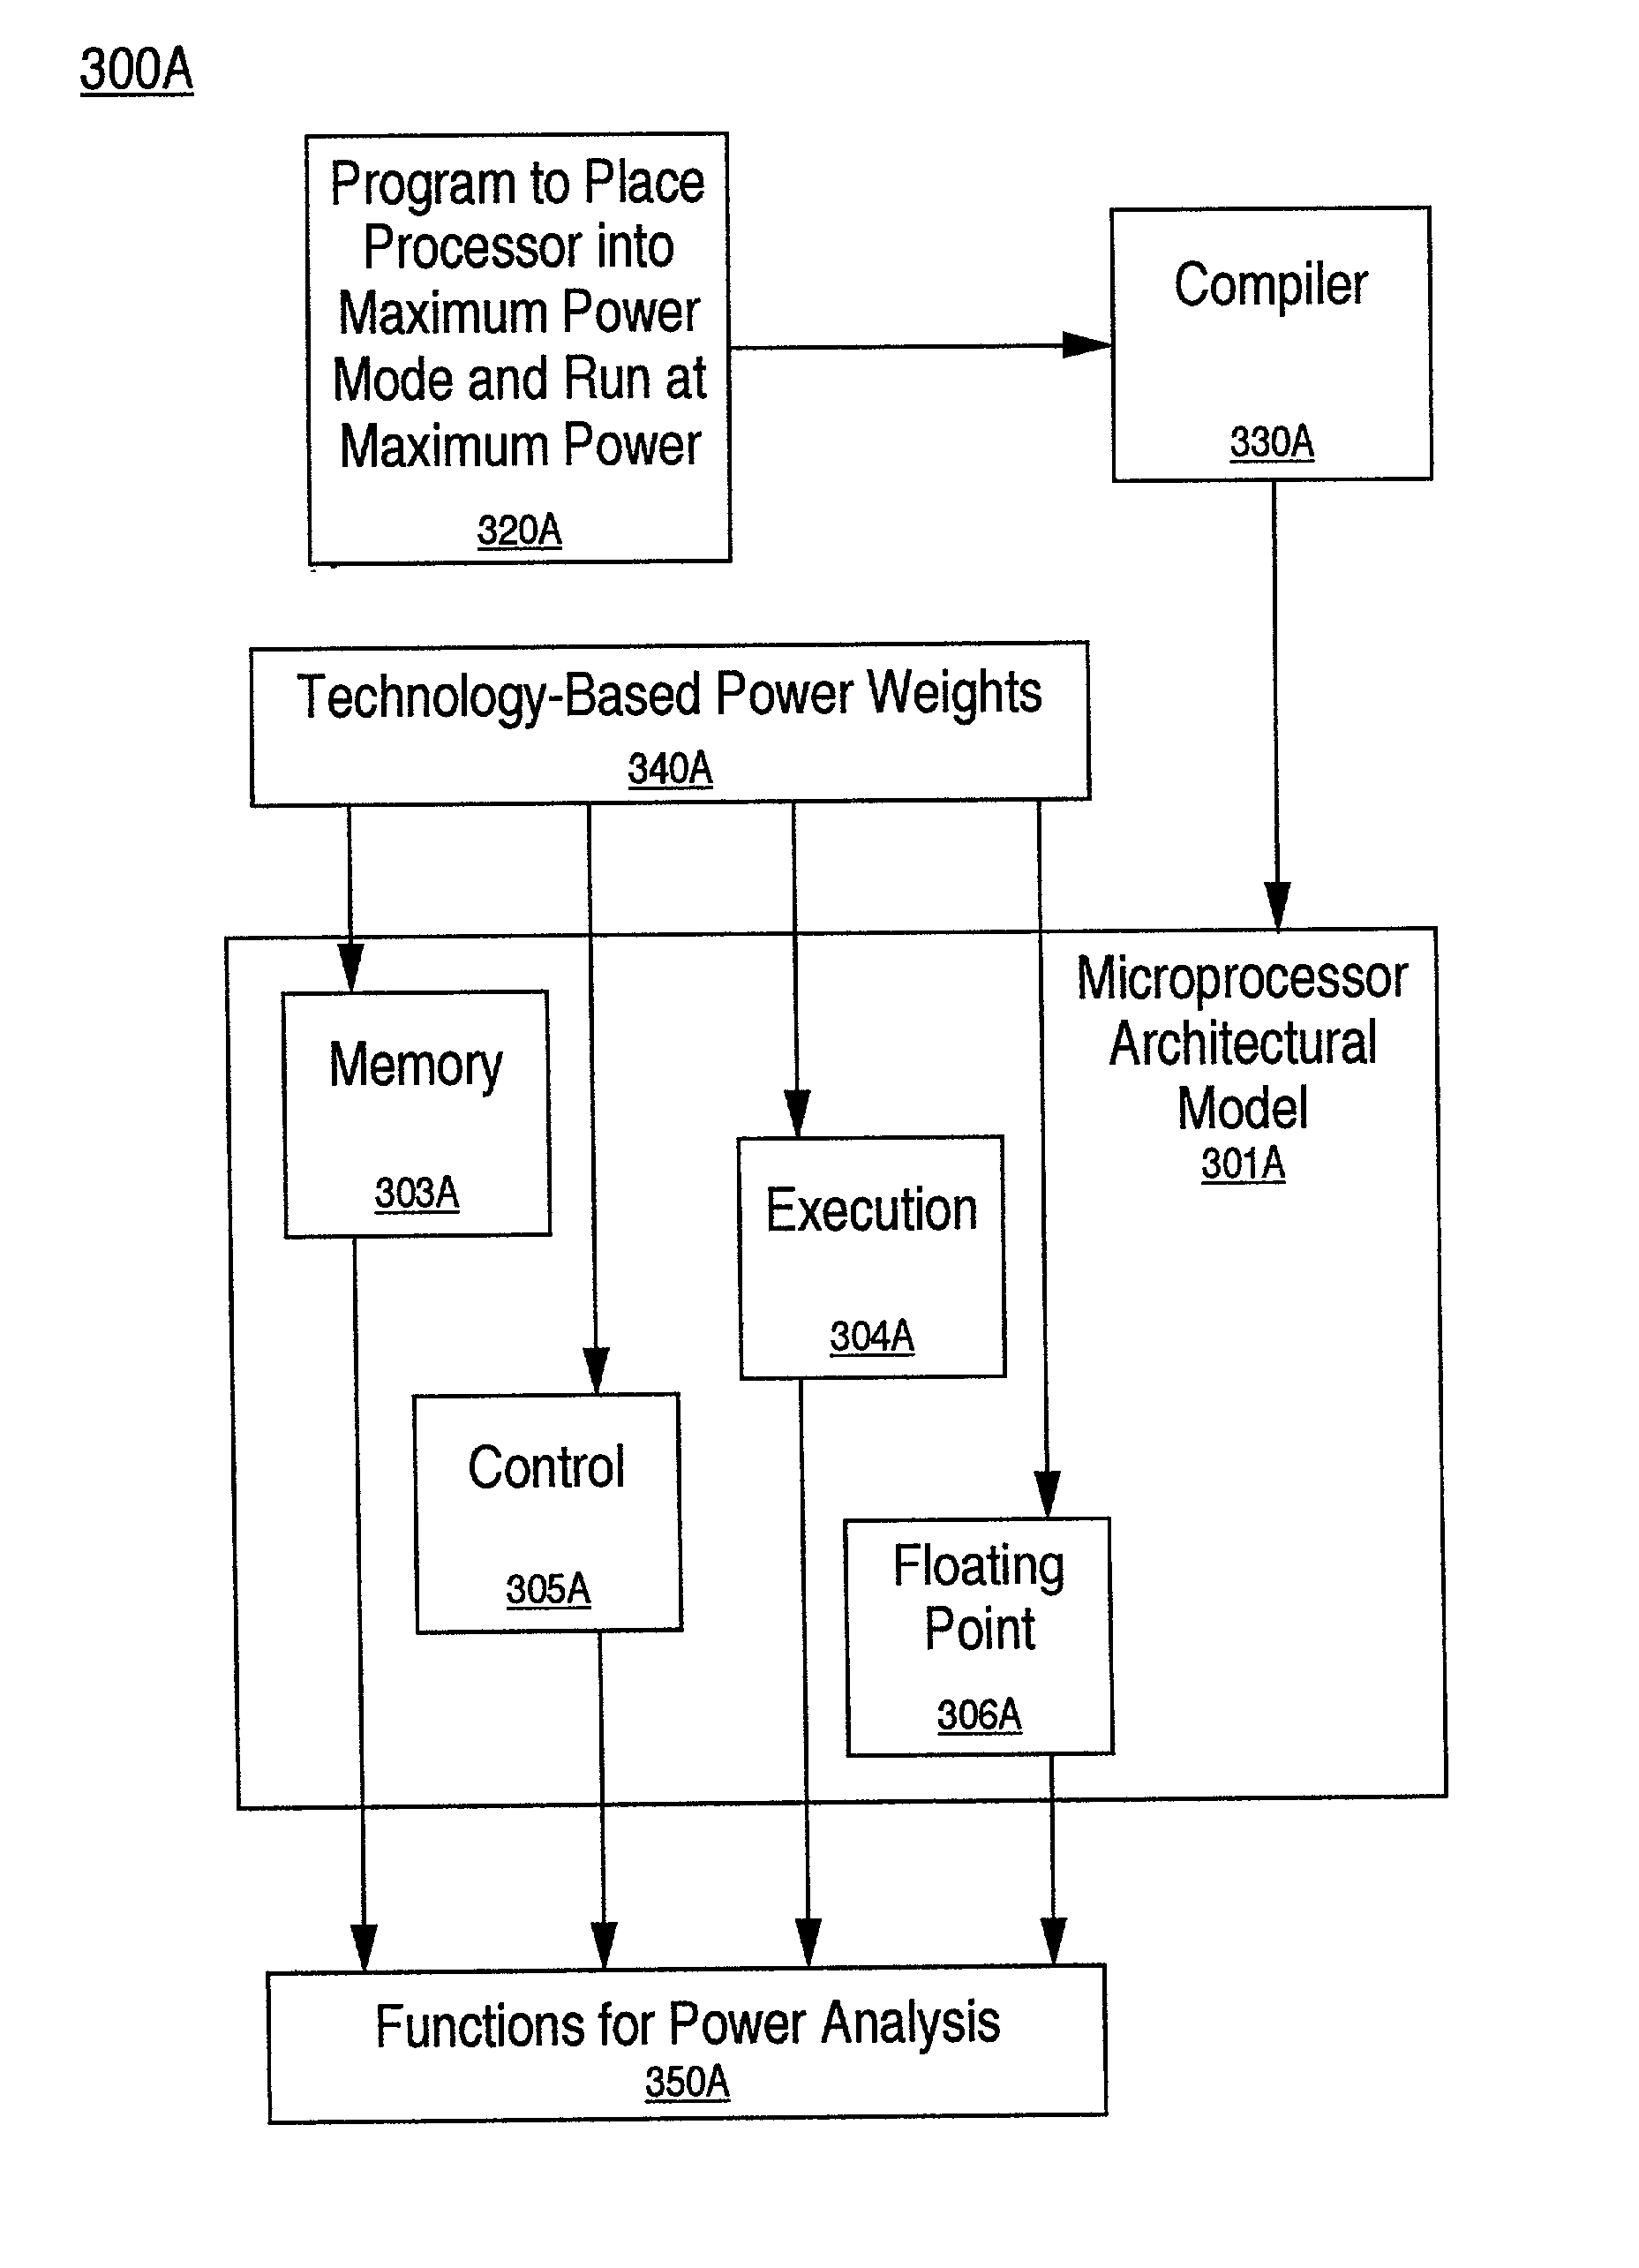 Method for deriving the benchmark program for estimating the maximum power consumed in a microprocessor